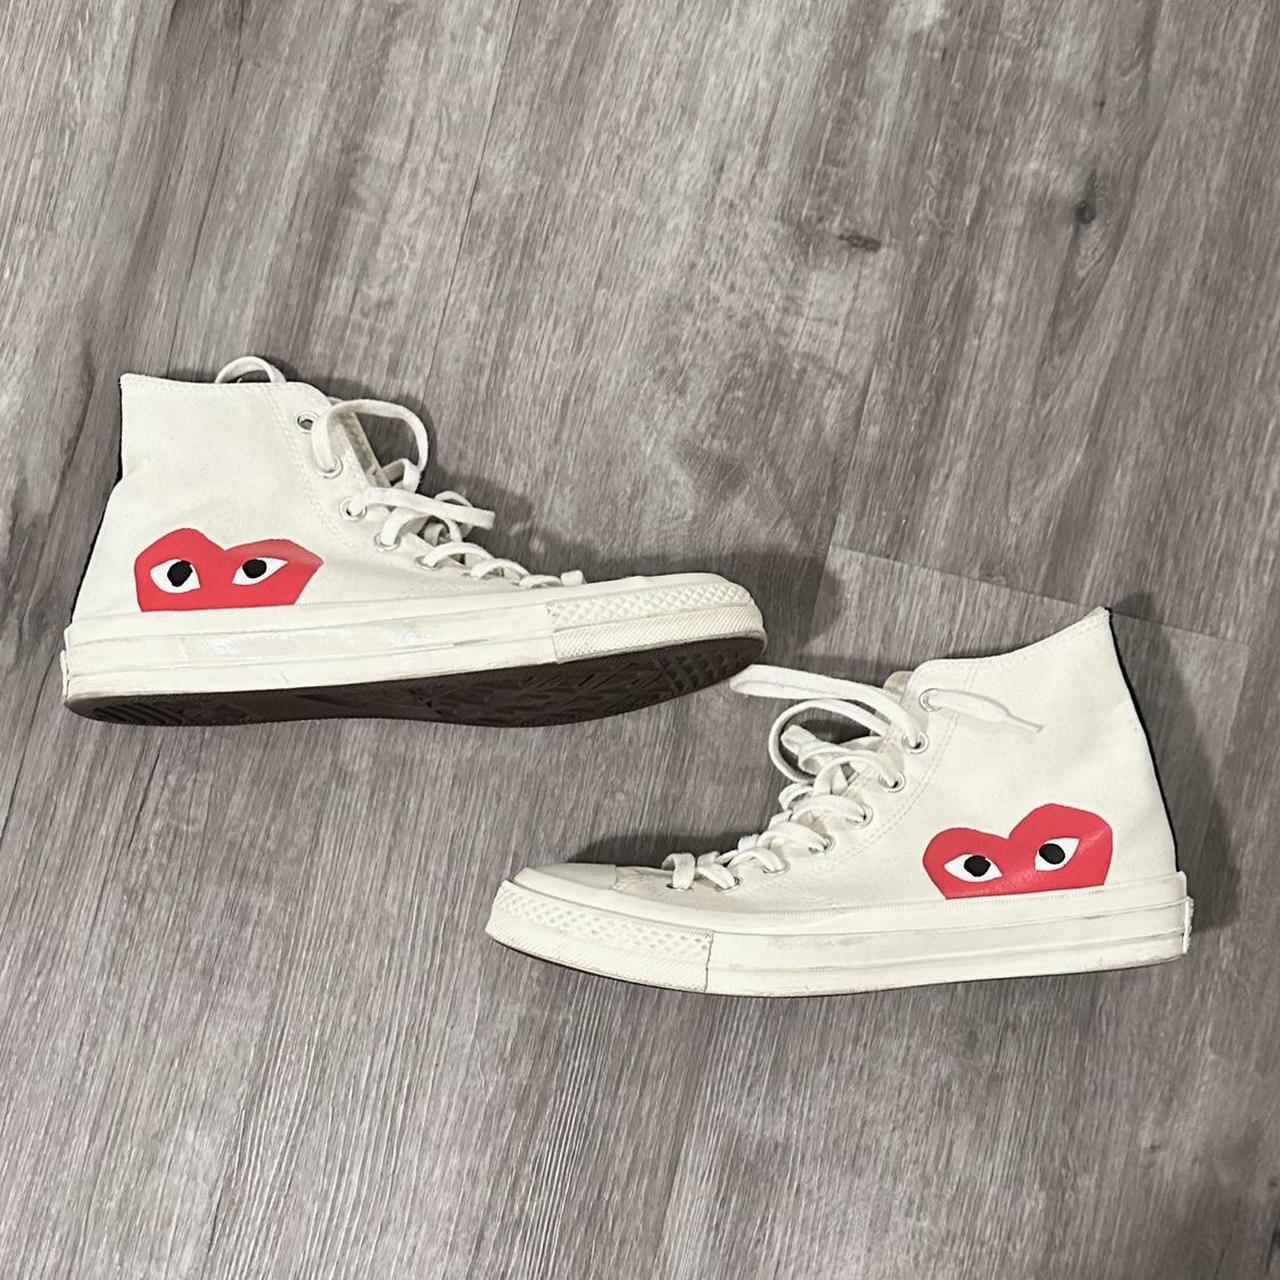 Comme des Garçons Play Men's White and Red Trainers (3)